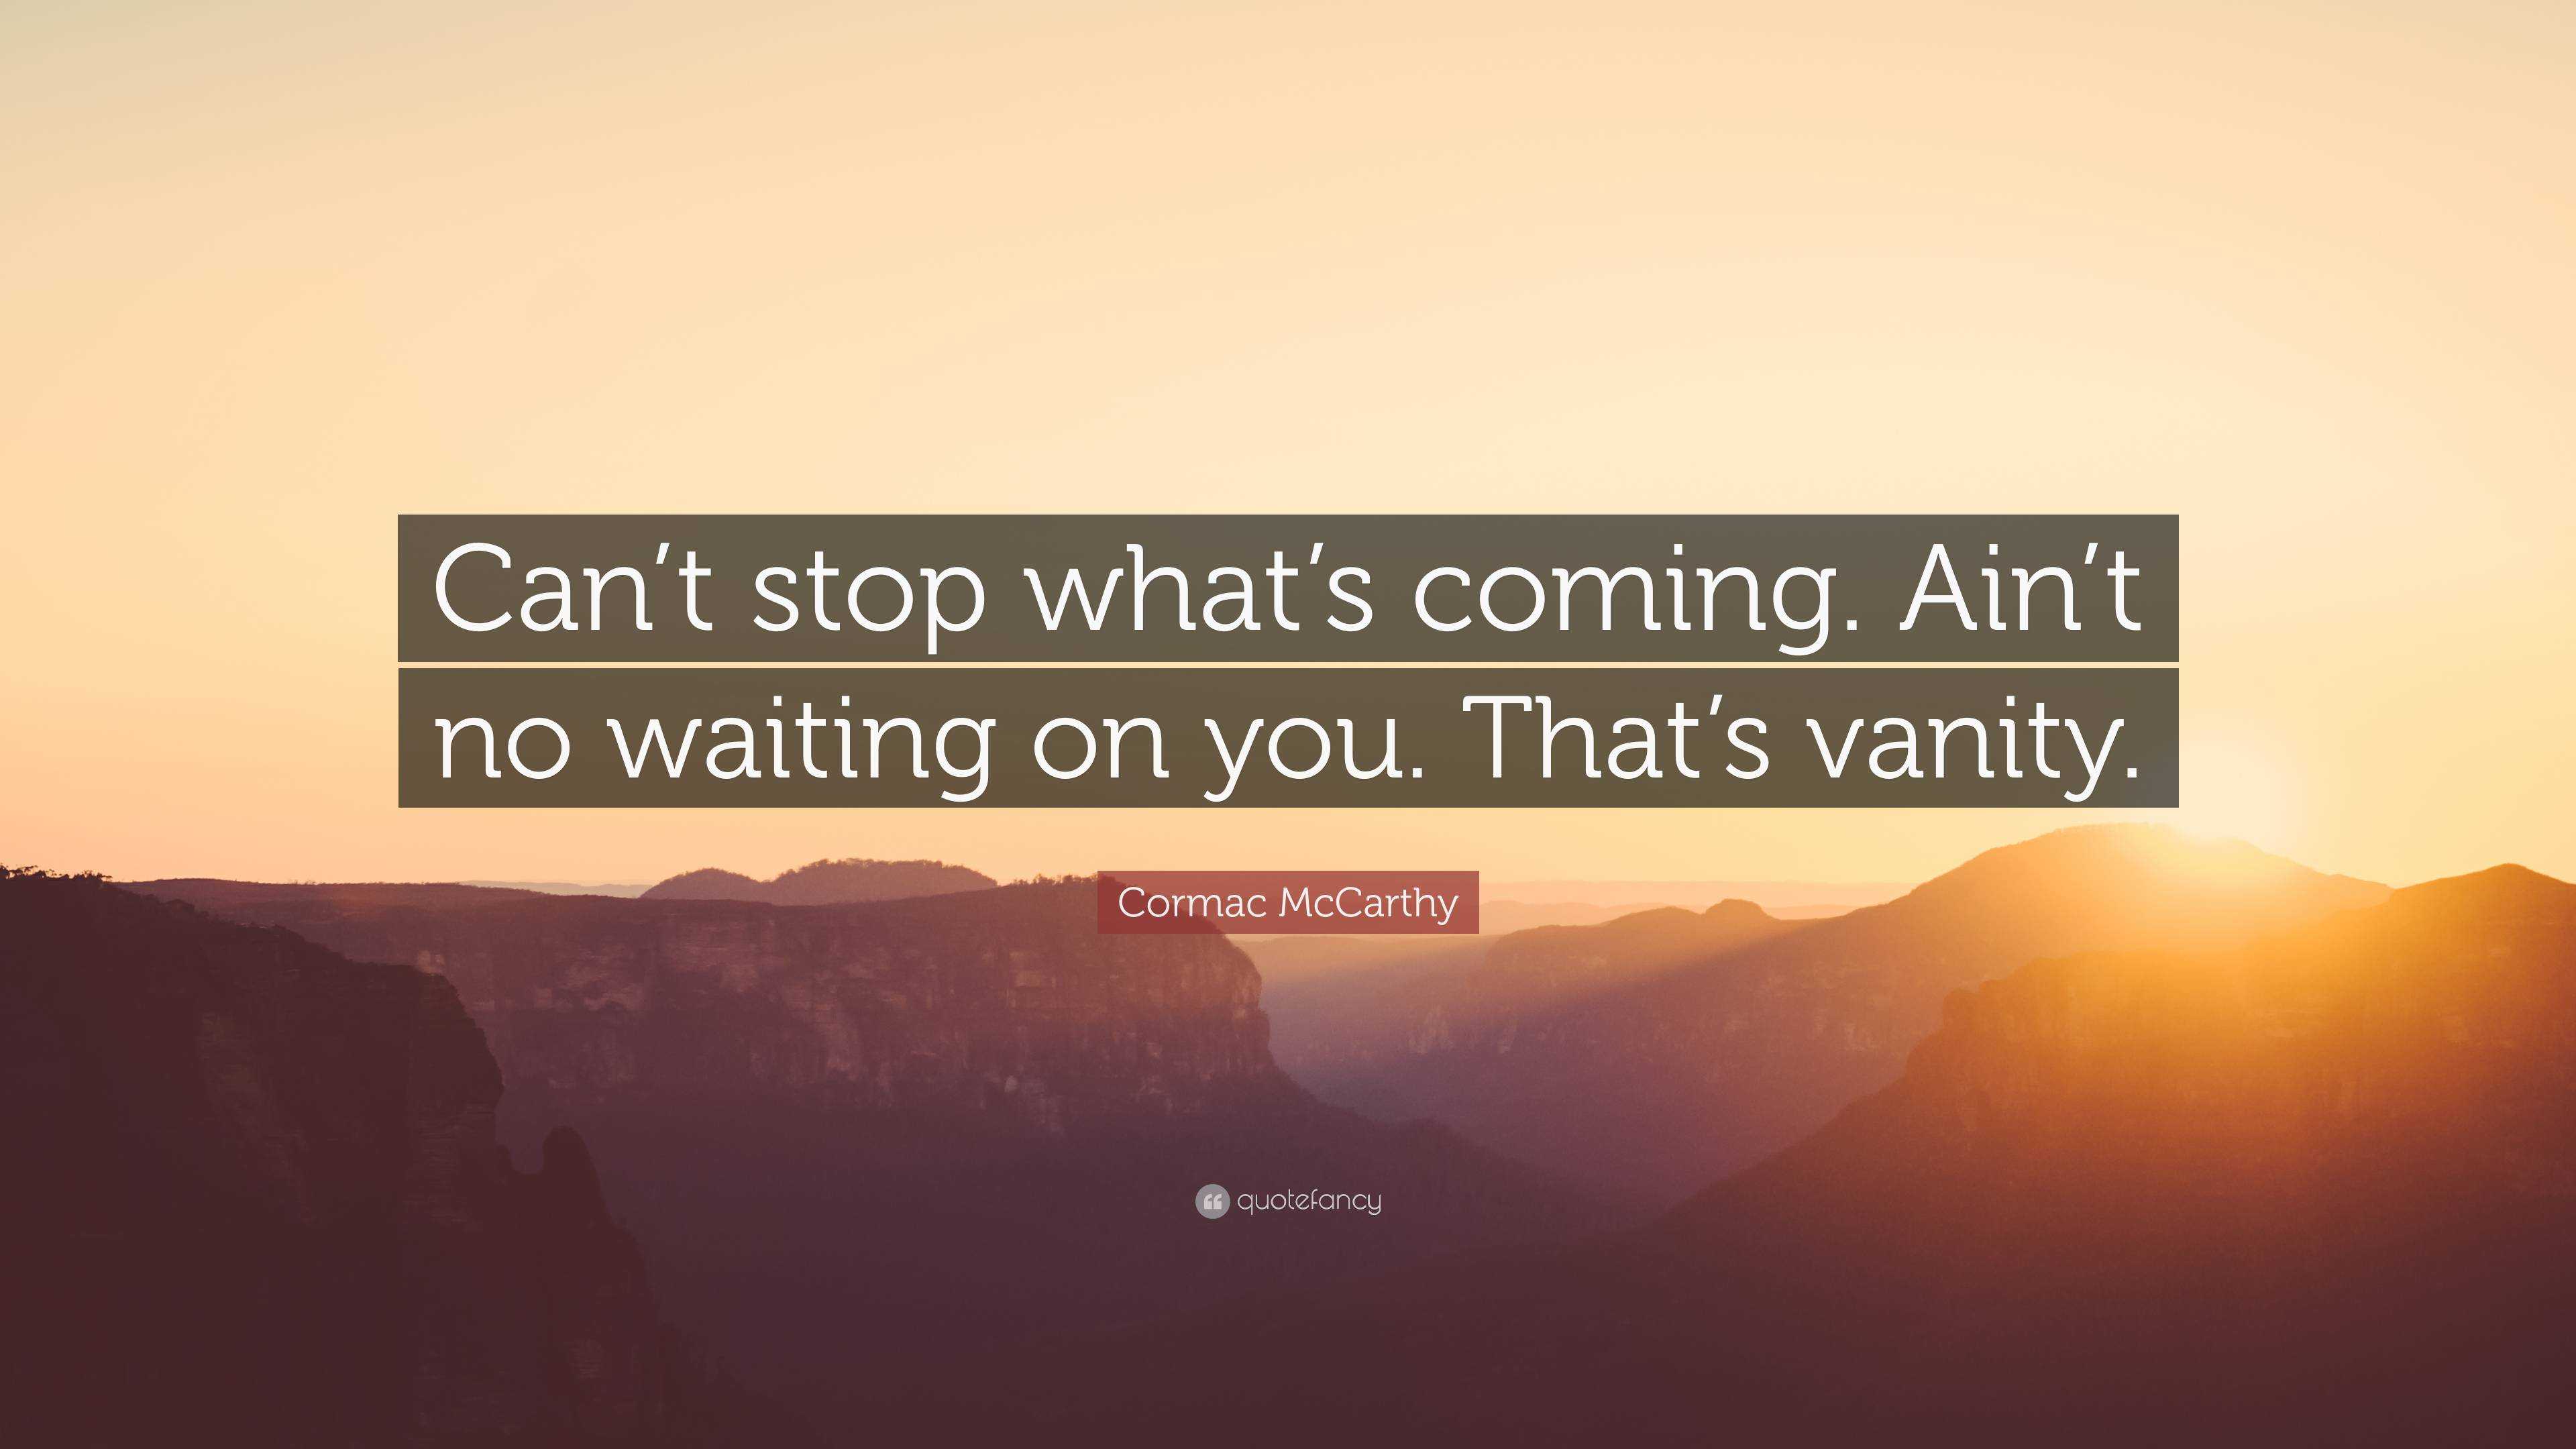 Cormac Mccarthy Quote Can T Stop What S Coming Ain T No Waiting On You That S Vanity